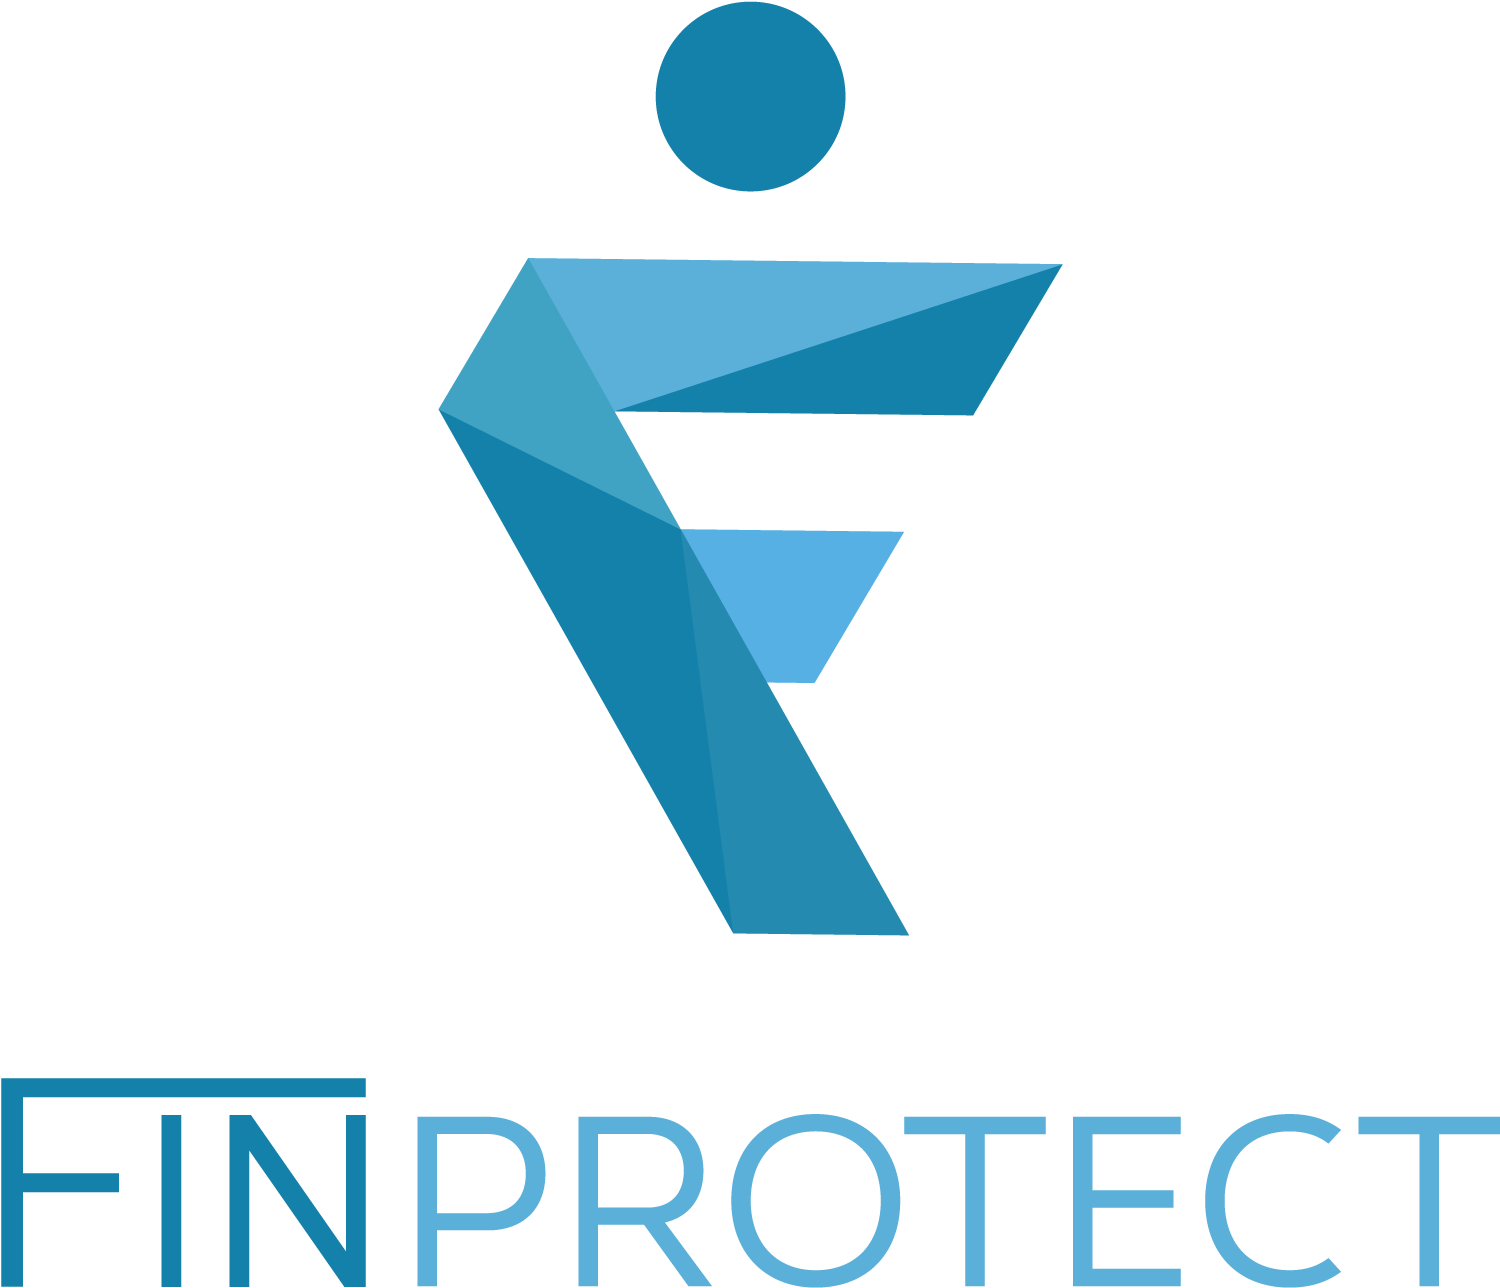 FinProtect